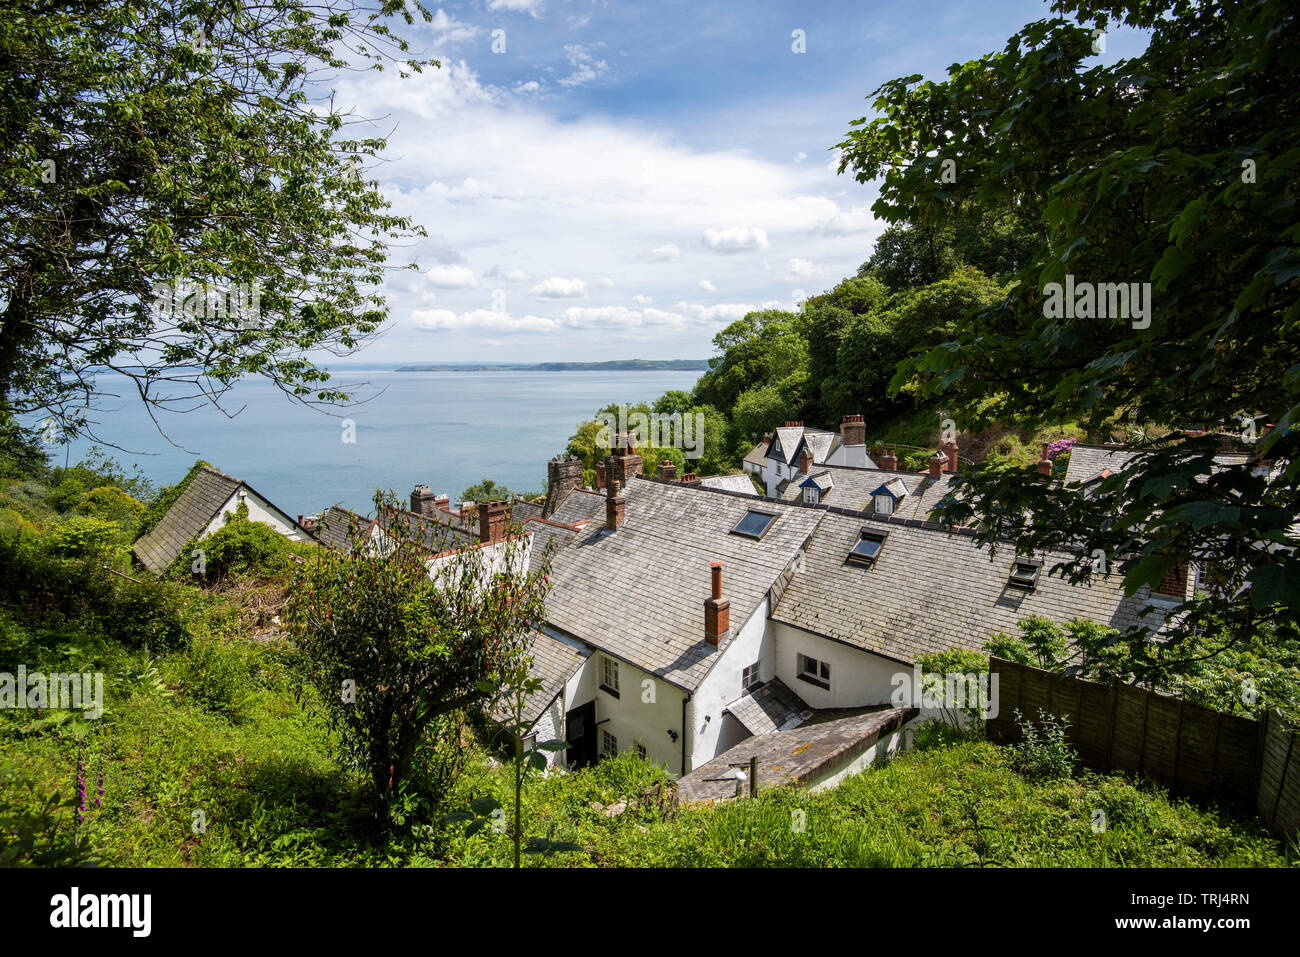 Looking down on the village and Bideford Bay in Clovelly, Devon England UK Stock Photo